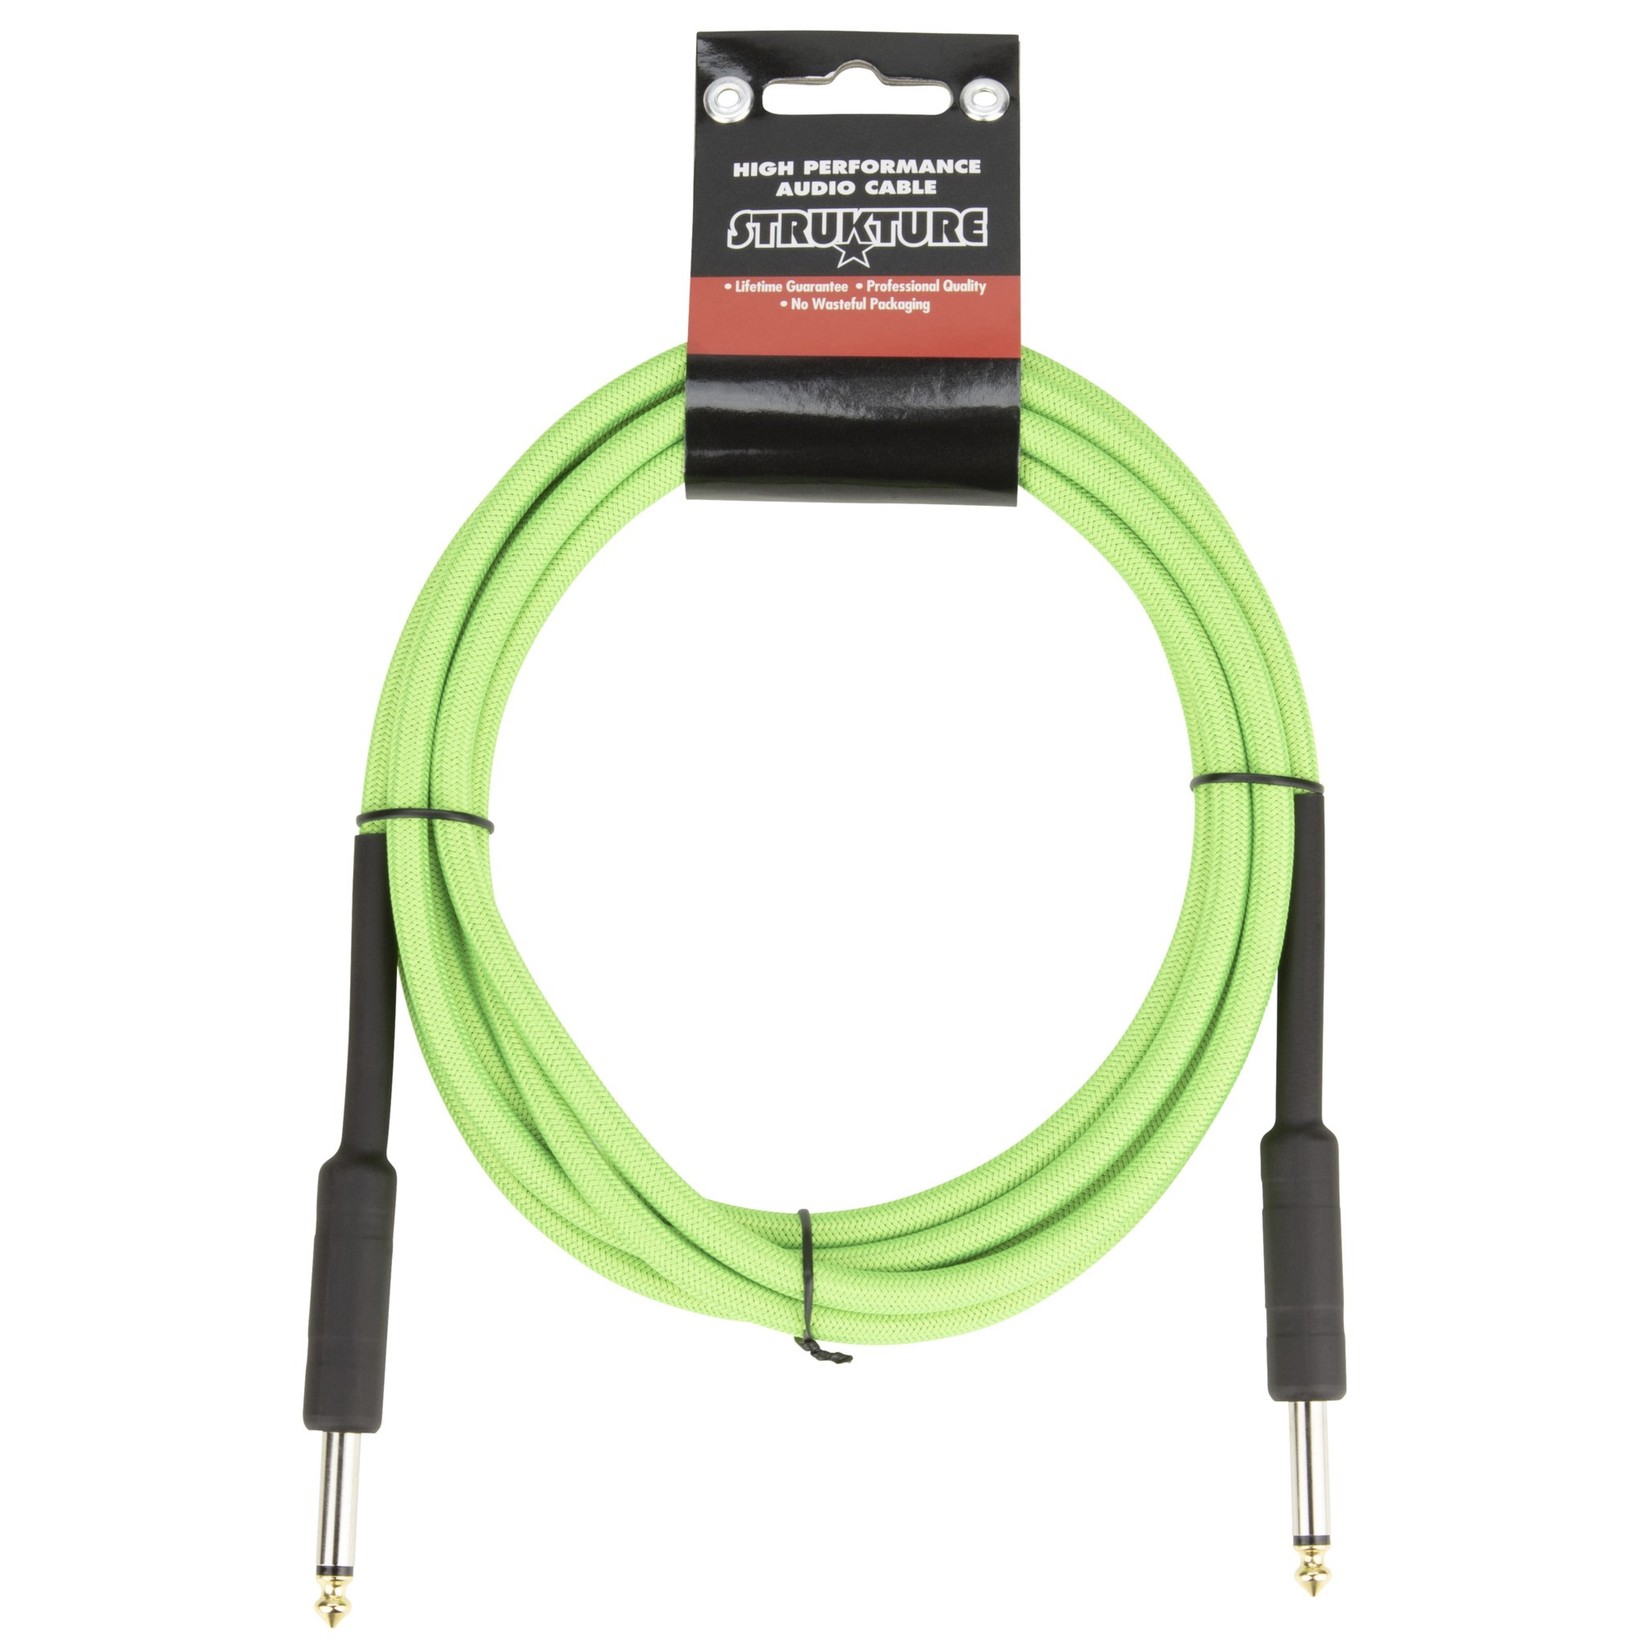 Strukture Strukture 18.6 ft Instrument Cable, 6mm Woven, 1/4" TS Straight Plugs, UFO Green (Bright Lime/Neon)